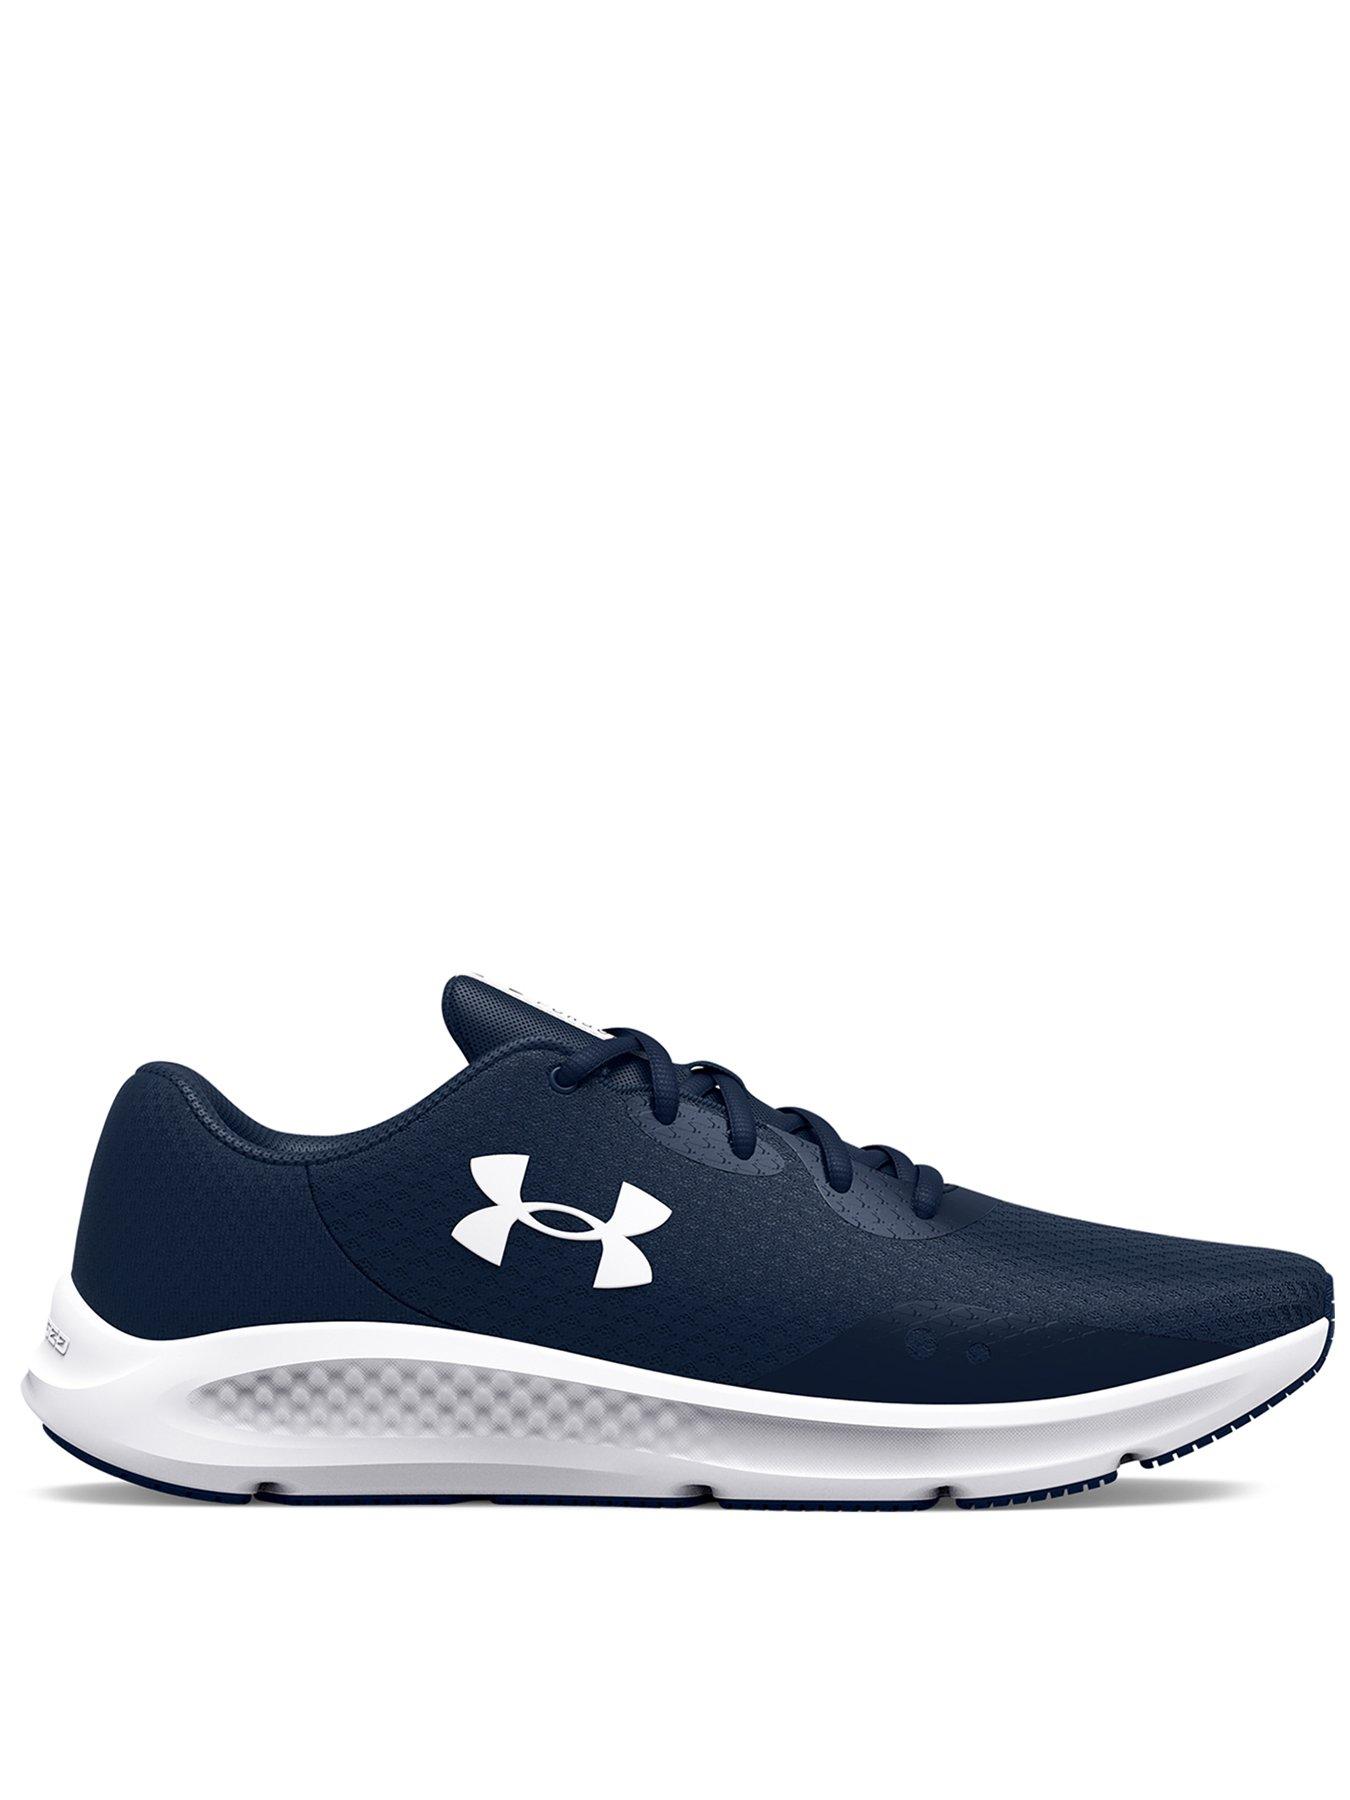 UNDER ARMOUR Men's Running Sneakers in 3 Colors Med D & Black in Extra Wide 4E 